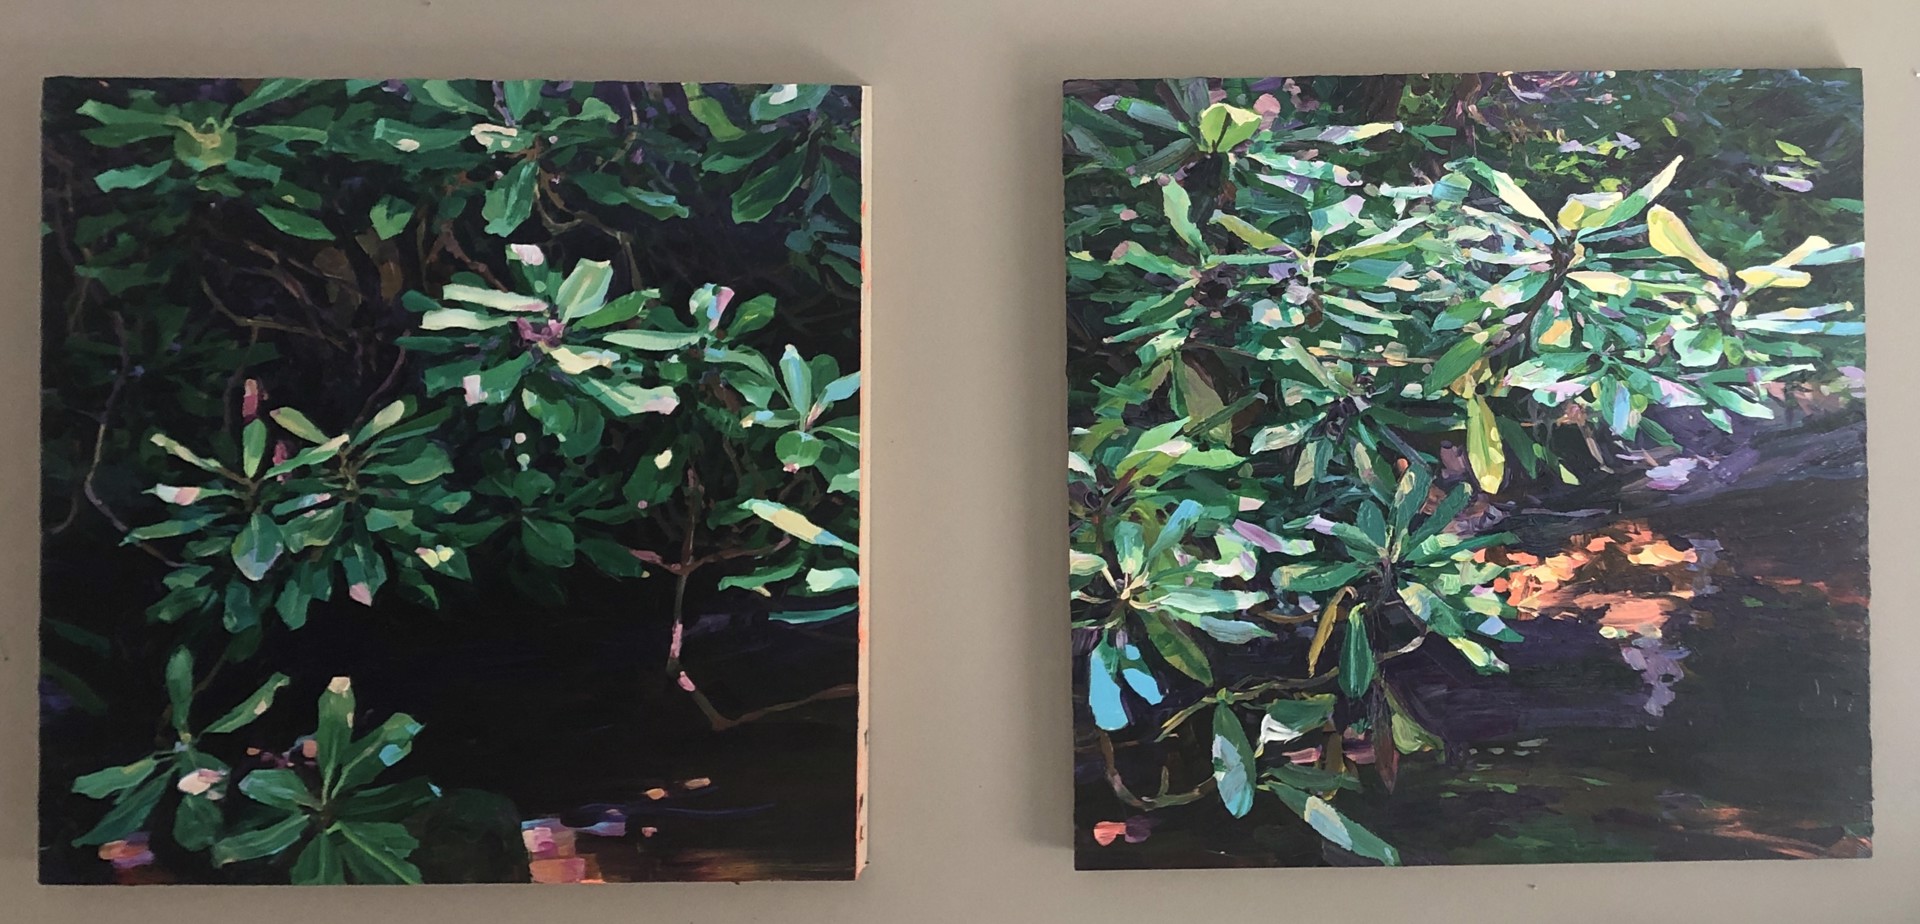 True Love - commissioned diptych by Annalisa Fink